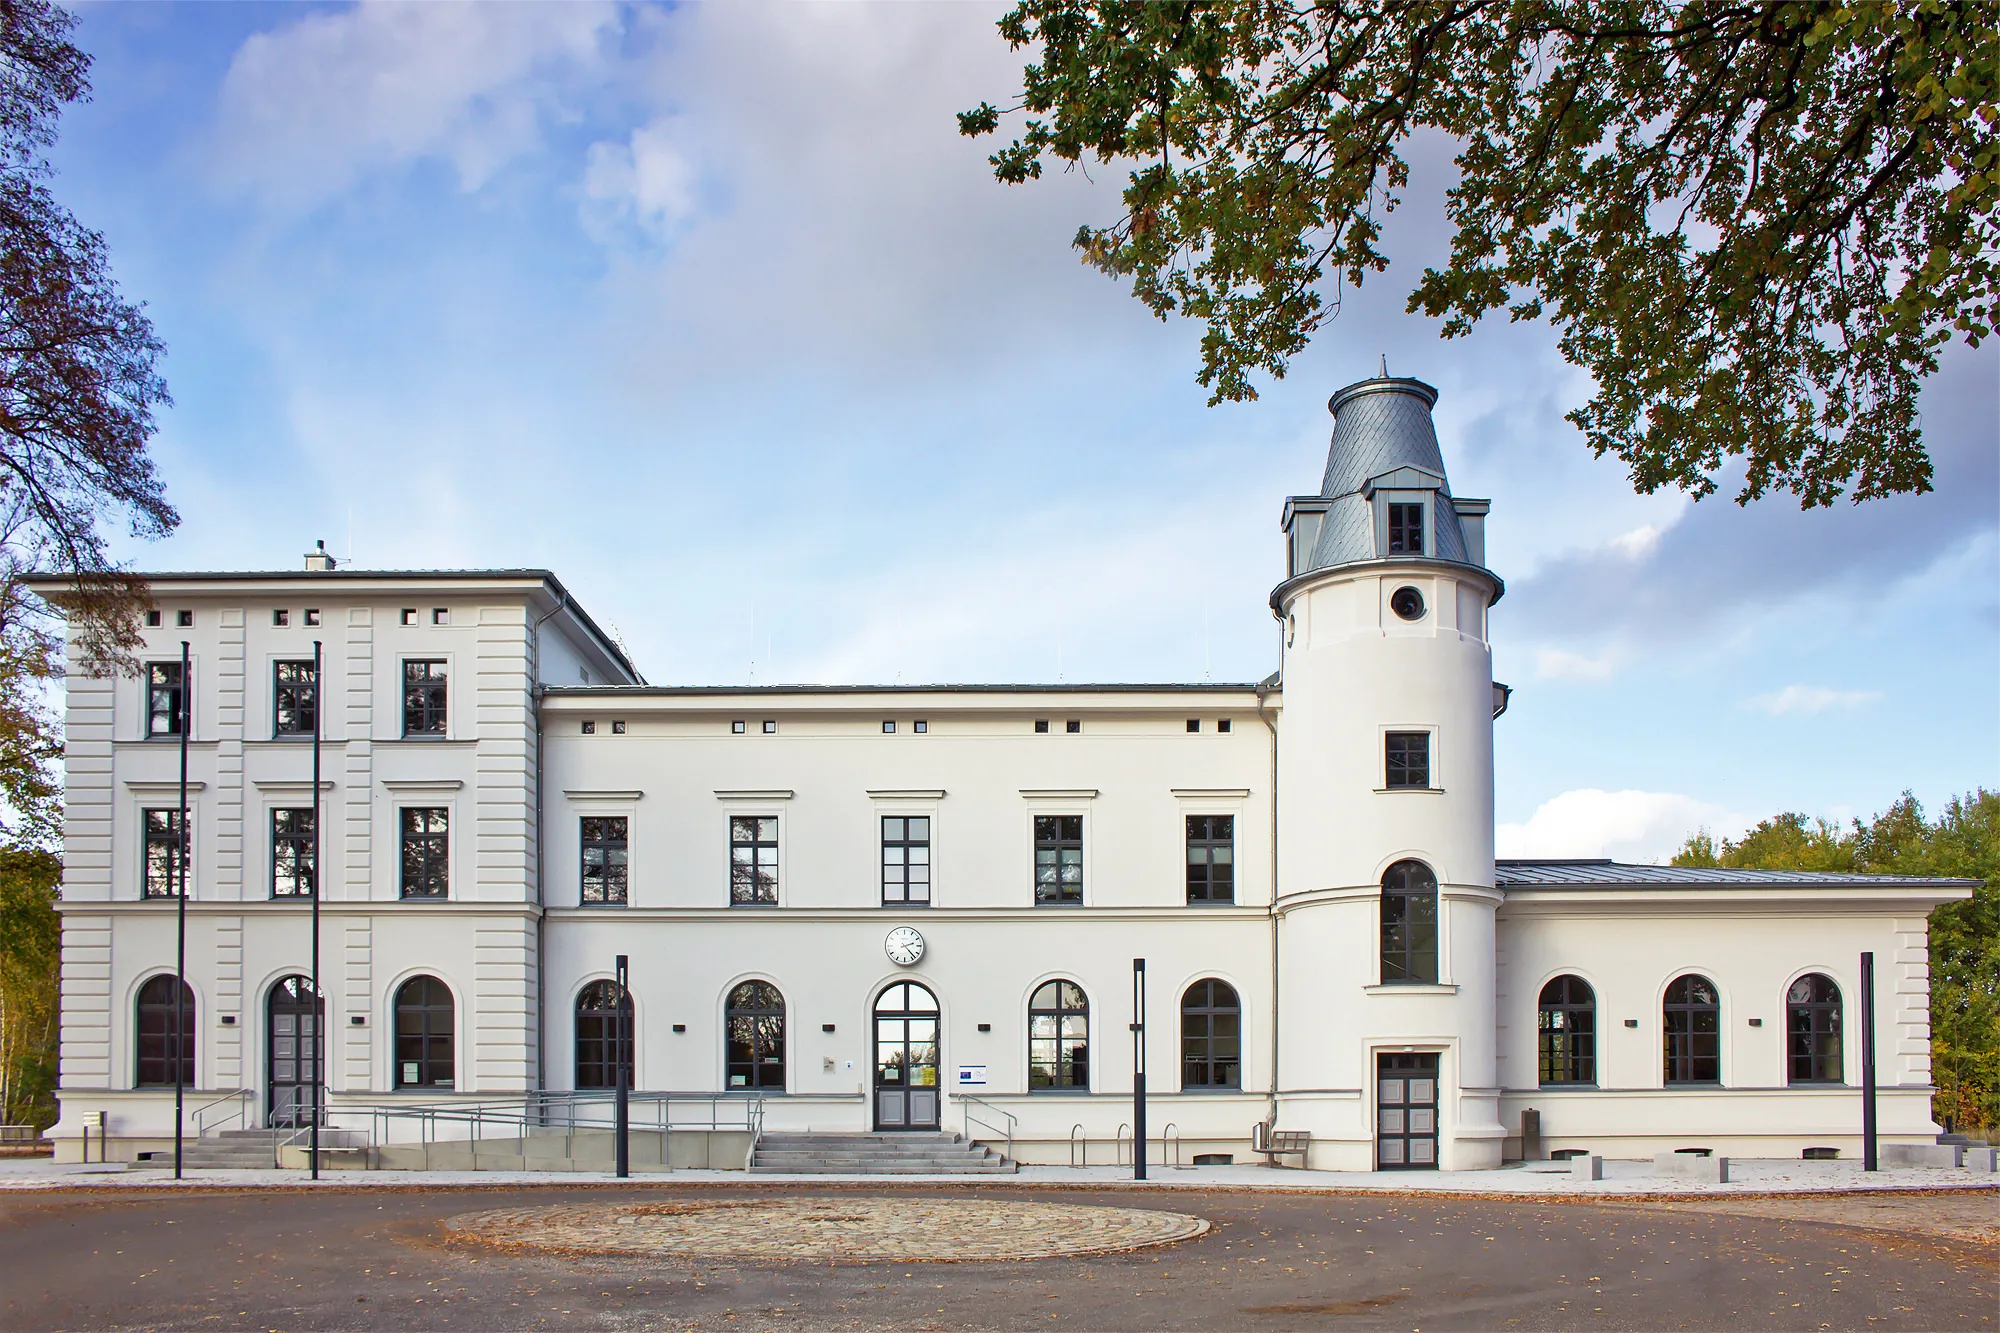 Photo showing: South view of the railway station "Dannenberg Ost" in Dannenberg (Elbe), built in 1874 (here after renovation in 2012). The building shape is reminiscent of a steam locomotive.